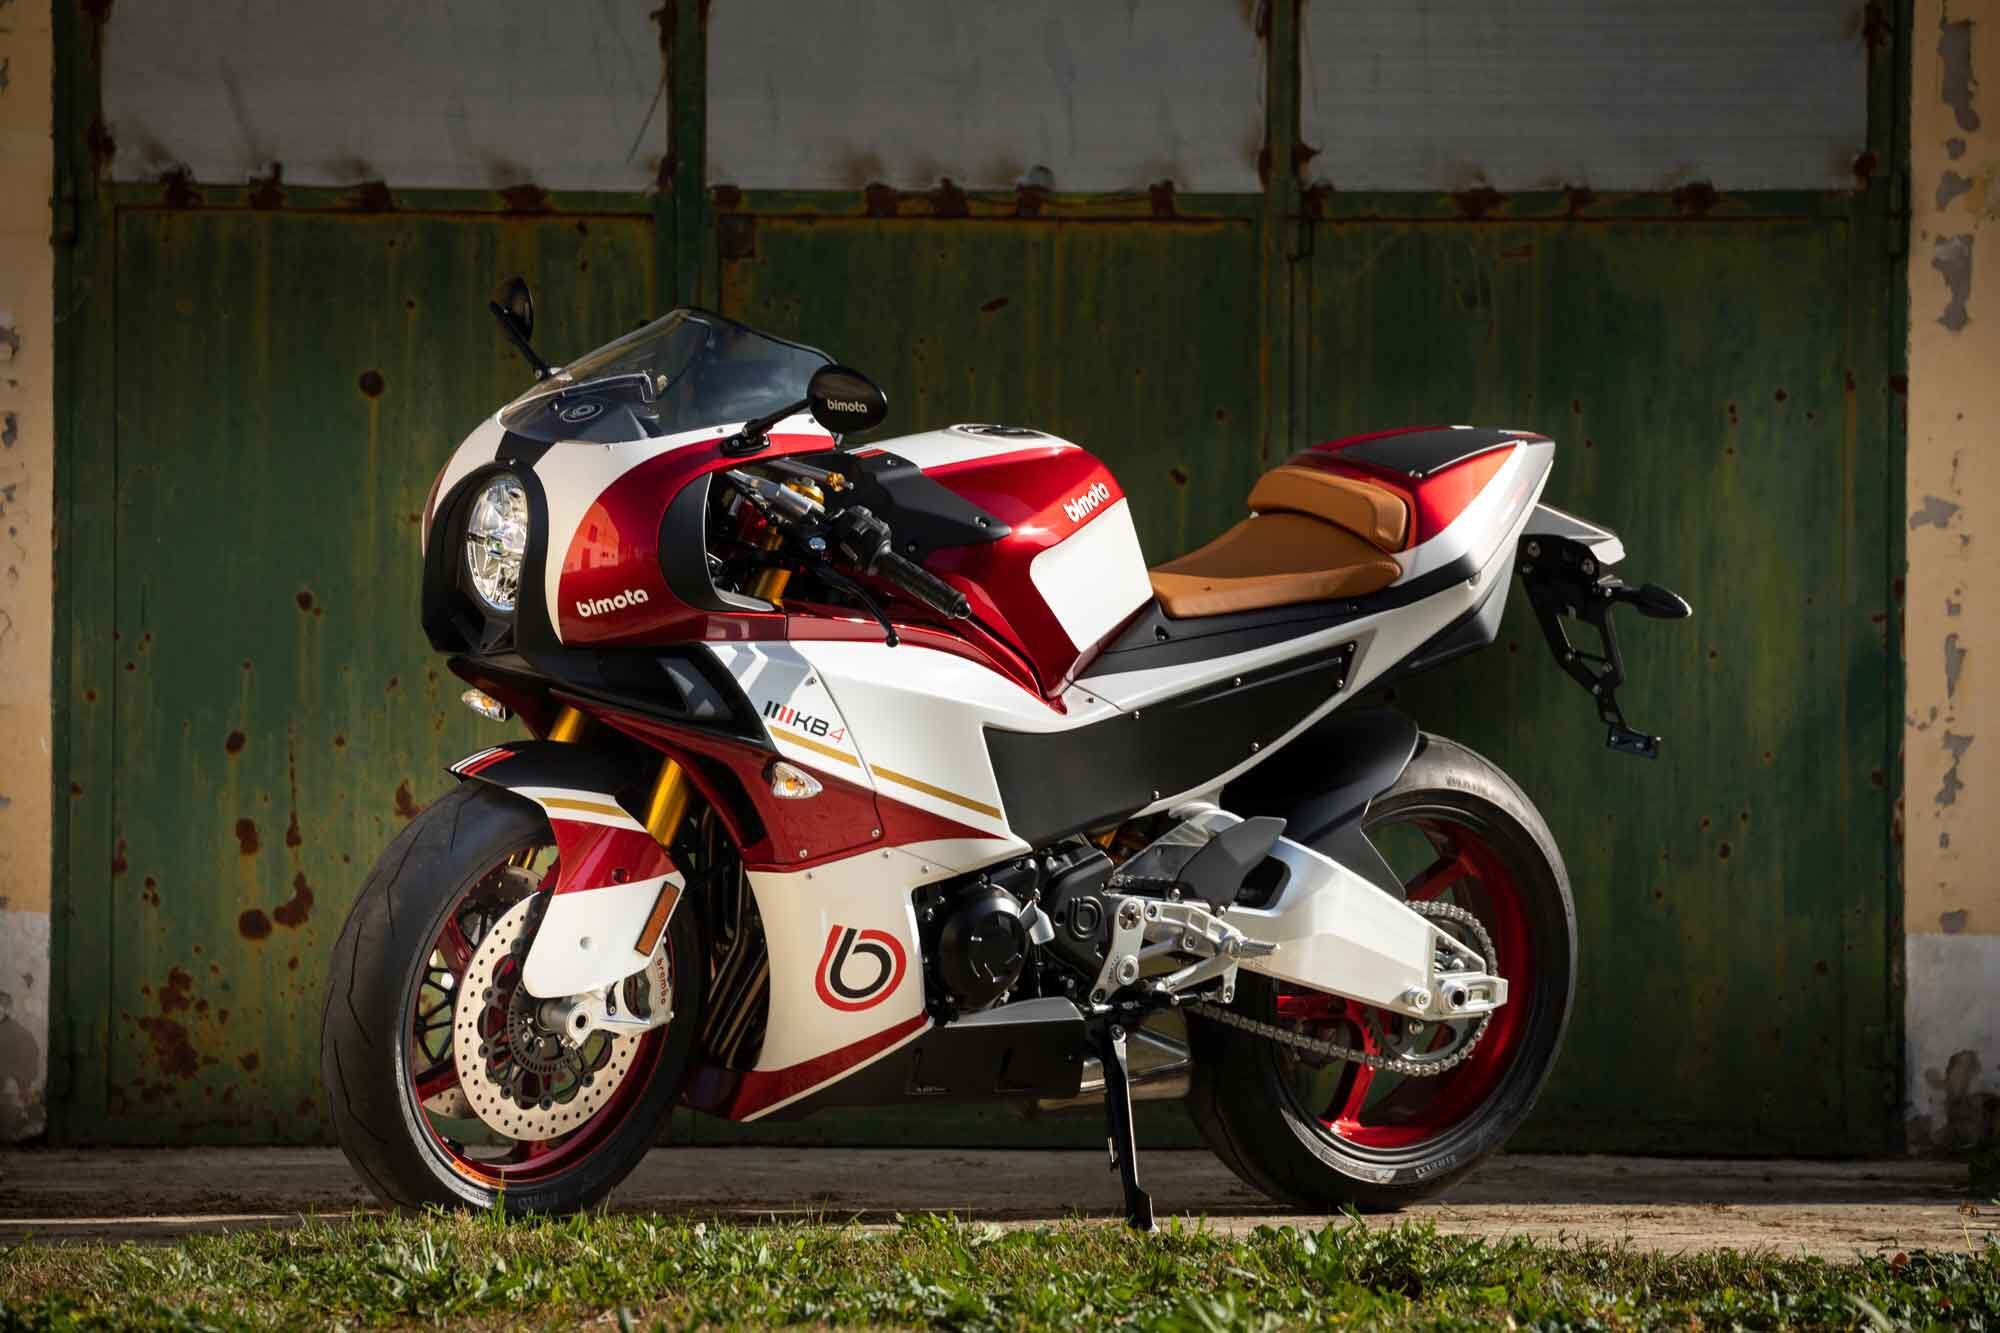 Pricing in the UK for the 2022 Bimota KB4 is set at 30,000 pounds sterling; no word on US availability or pricing yet.